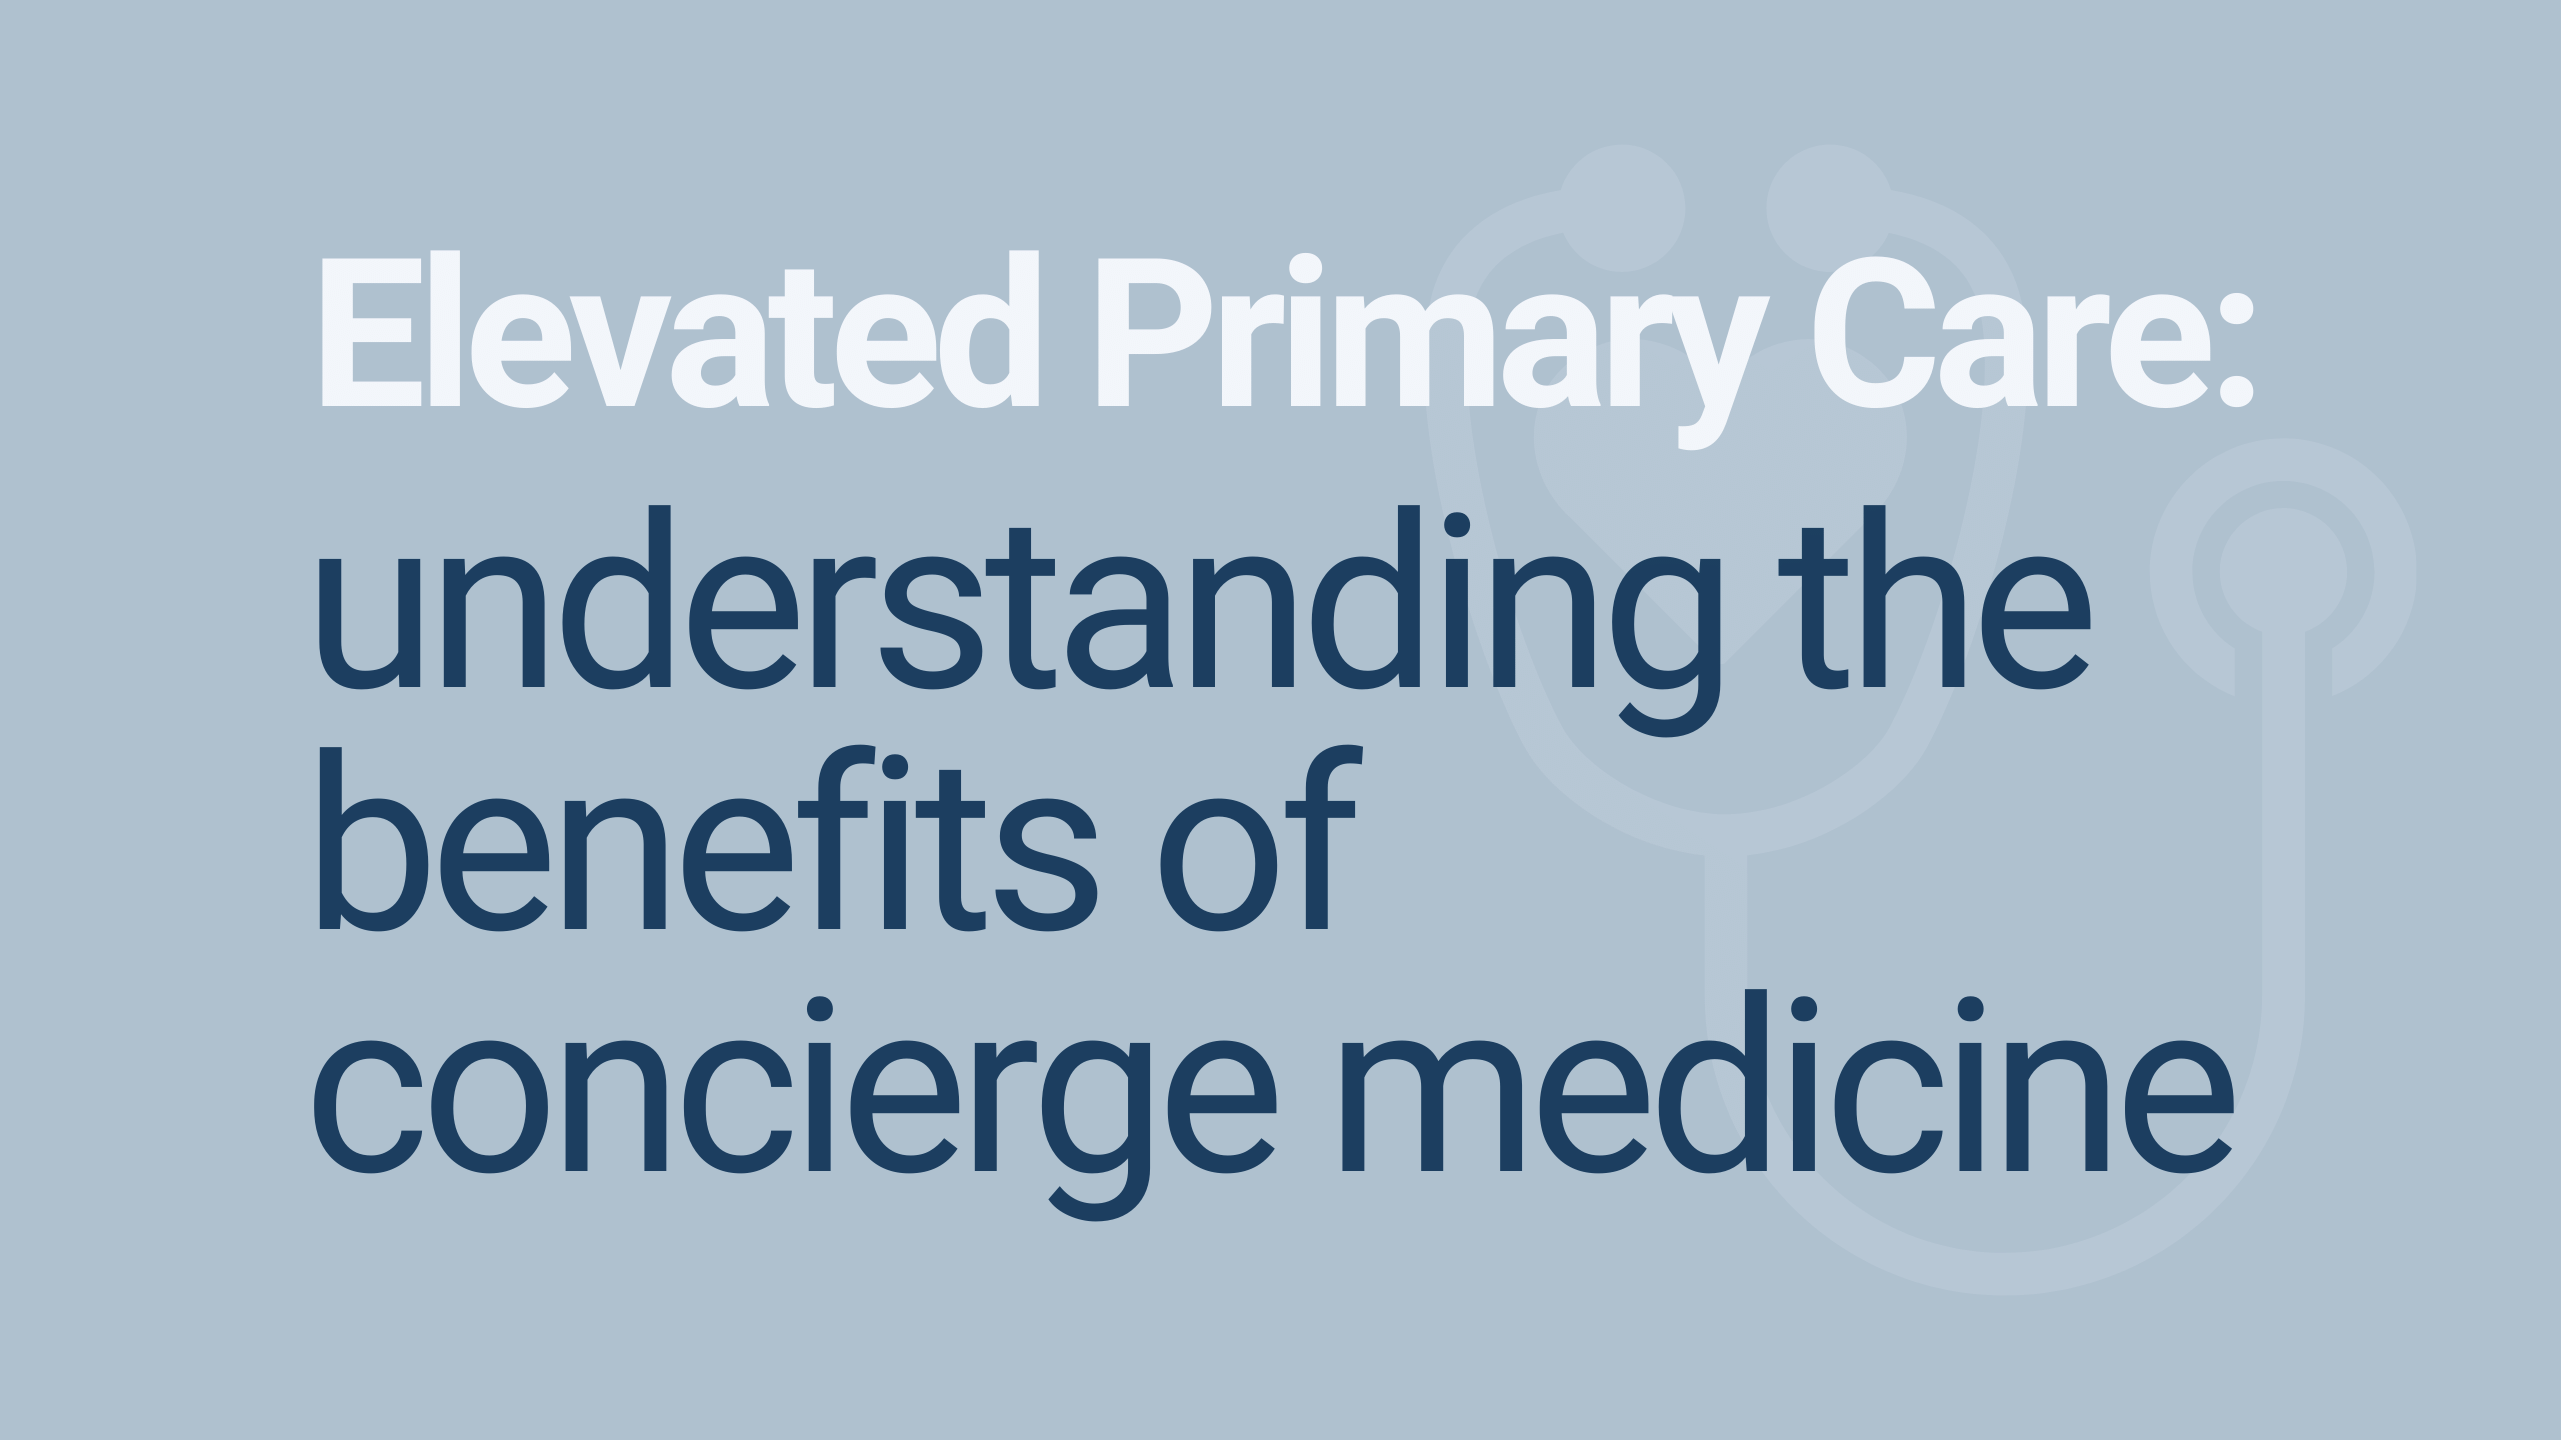 Concierge Medicine: Individualized Care, Direct Access to the Doctor, Preventative Primary Care, Comfort and Convenience, Patient Empowerment